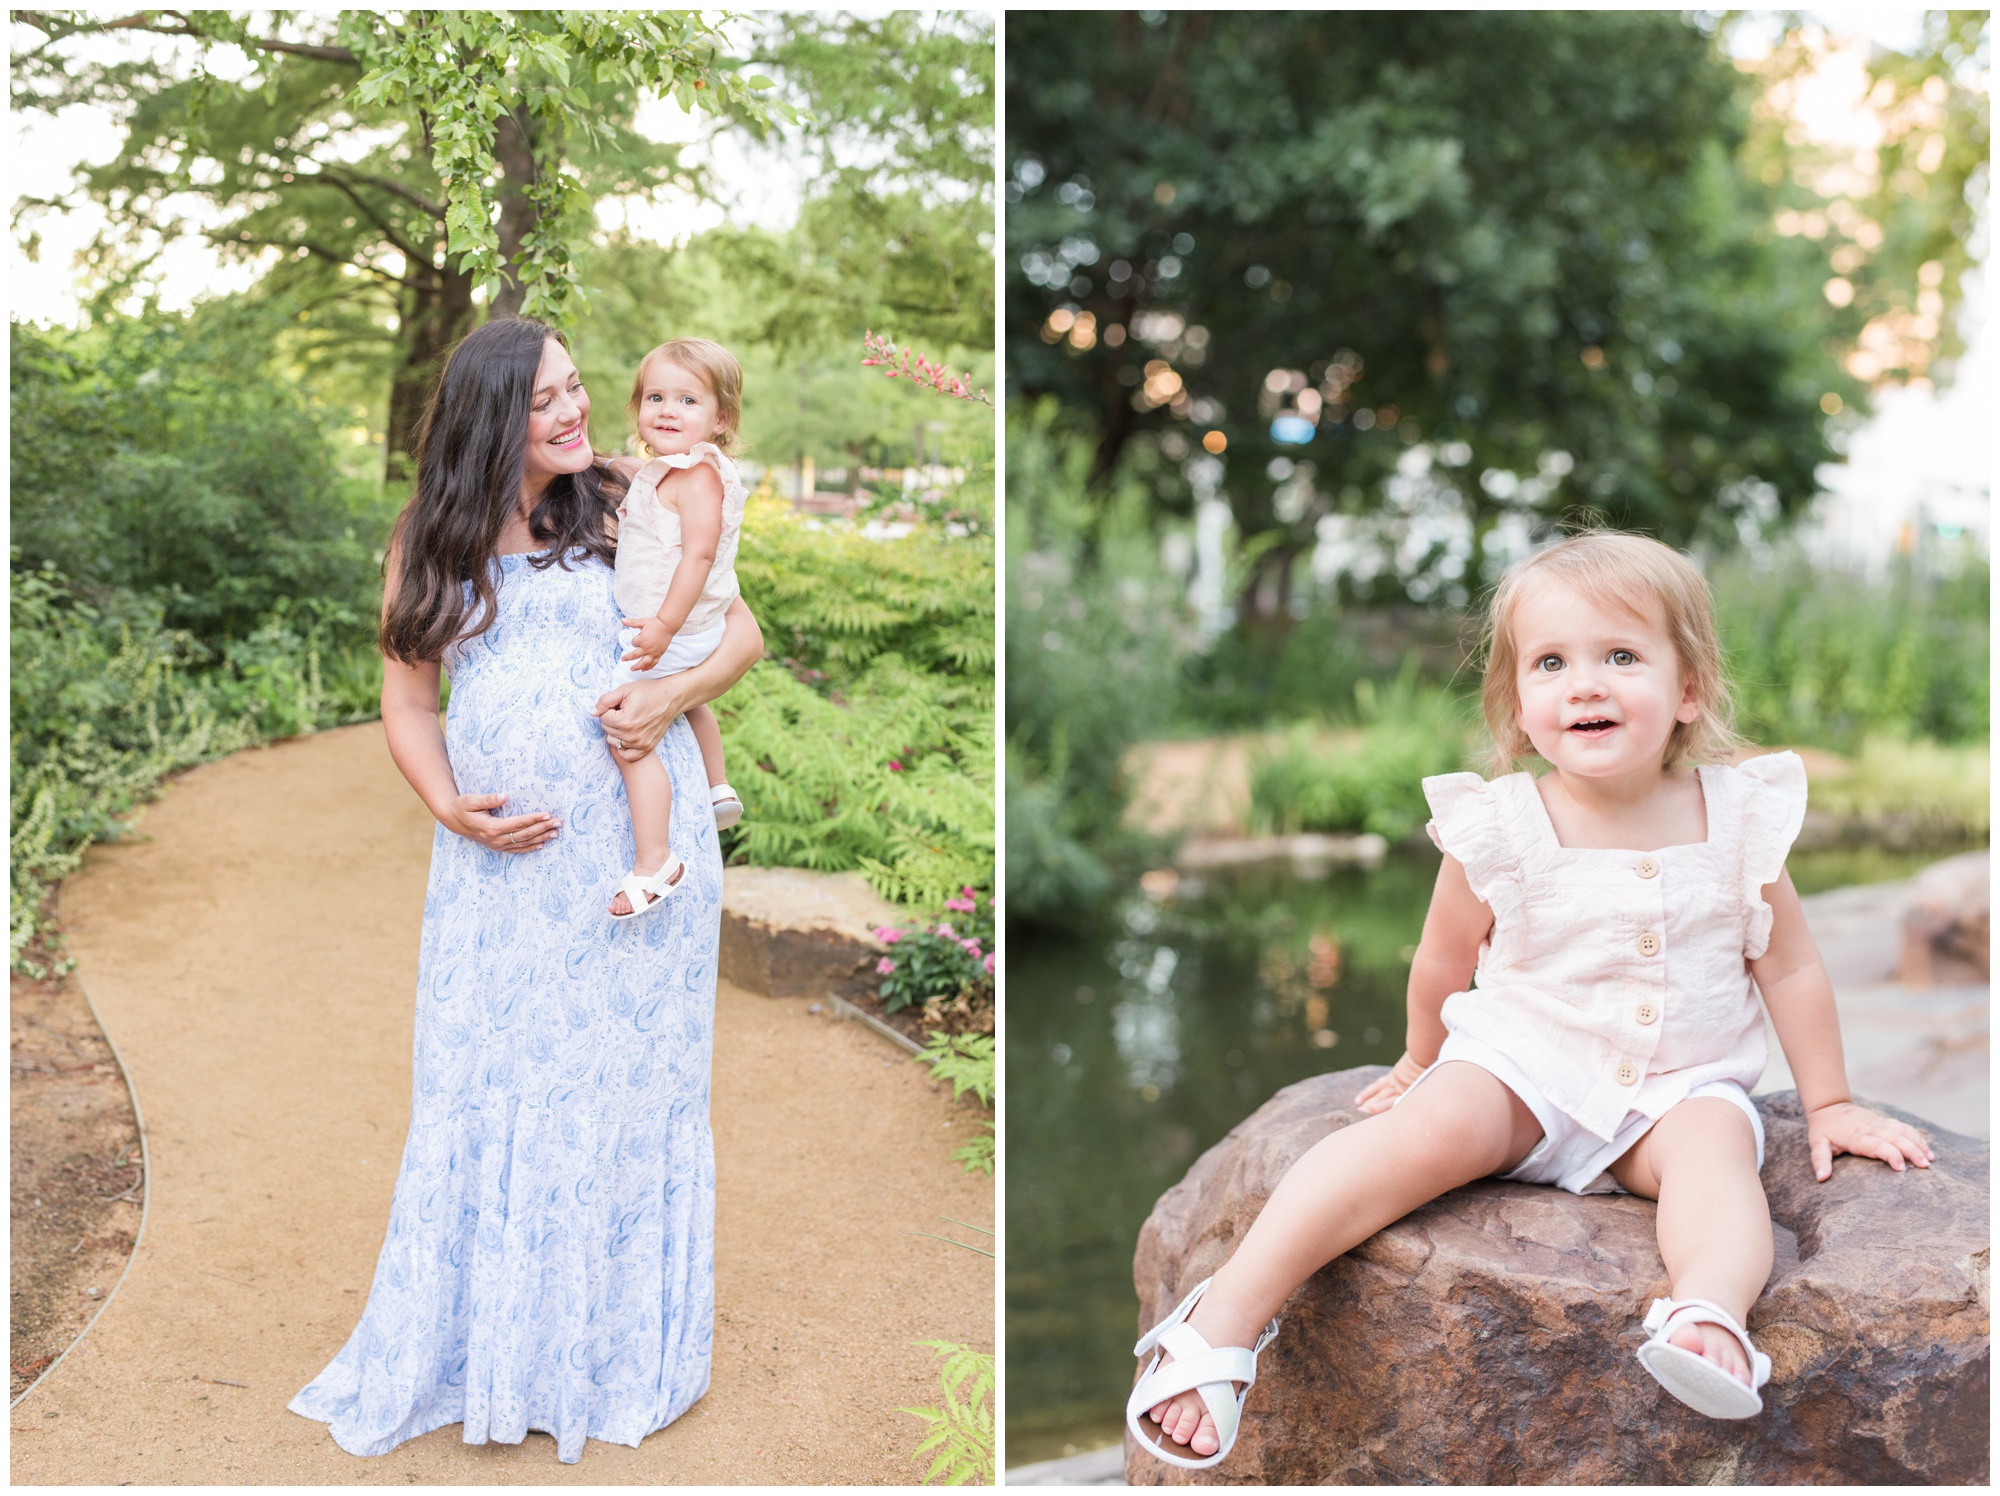 Fort Worth Family Photographer | Fort Worth Destination Photographer | Fort Worth Maternity Session | Oklahoma City | Oklahoma City Photographer | Lauren Grimes Photography